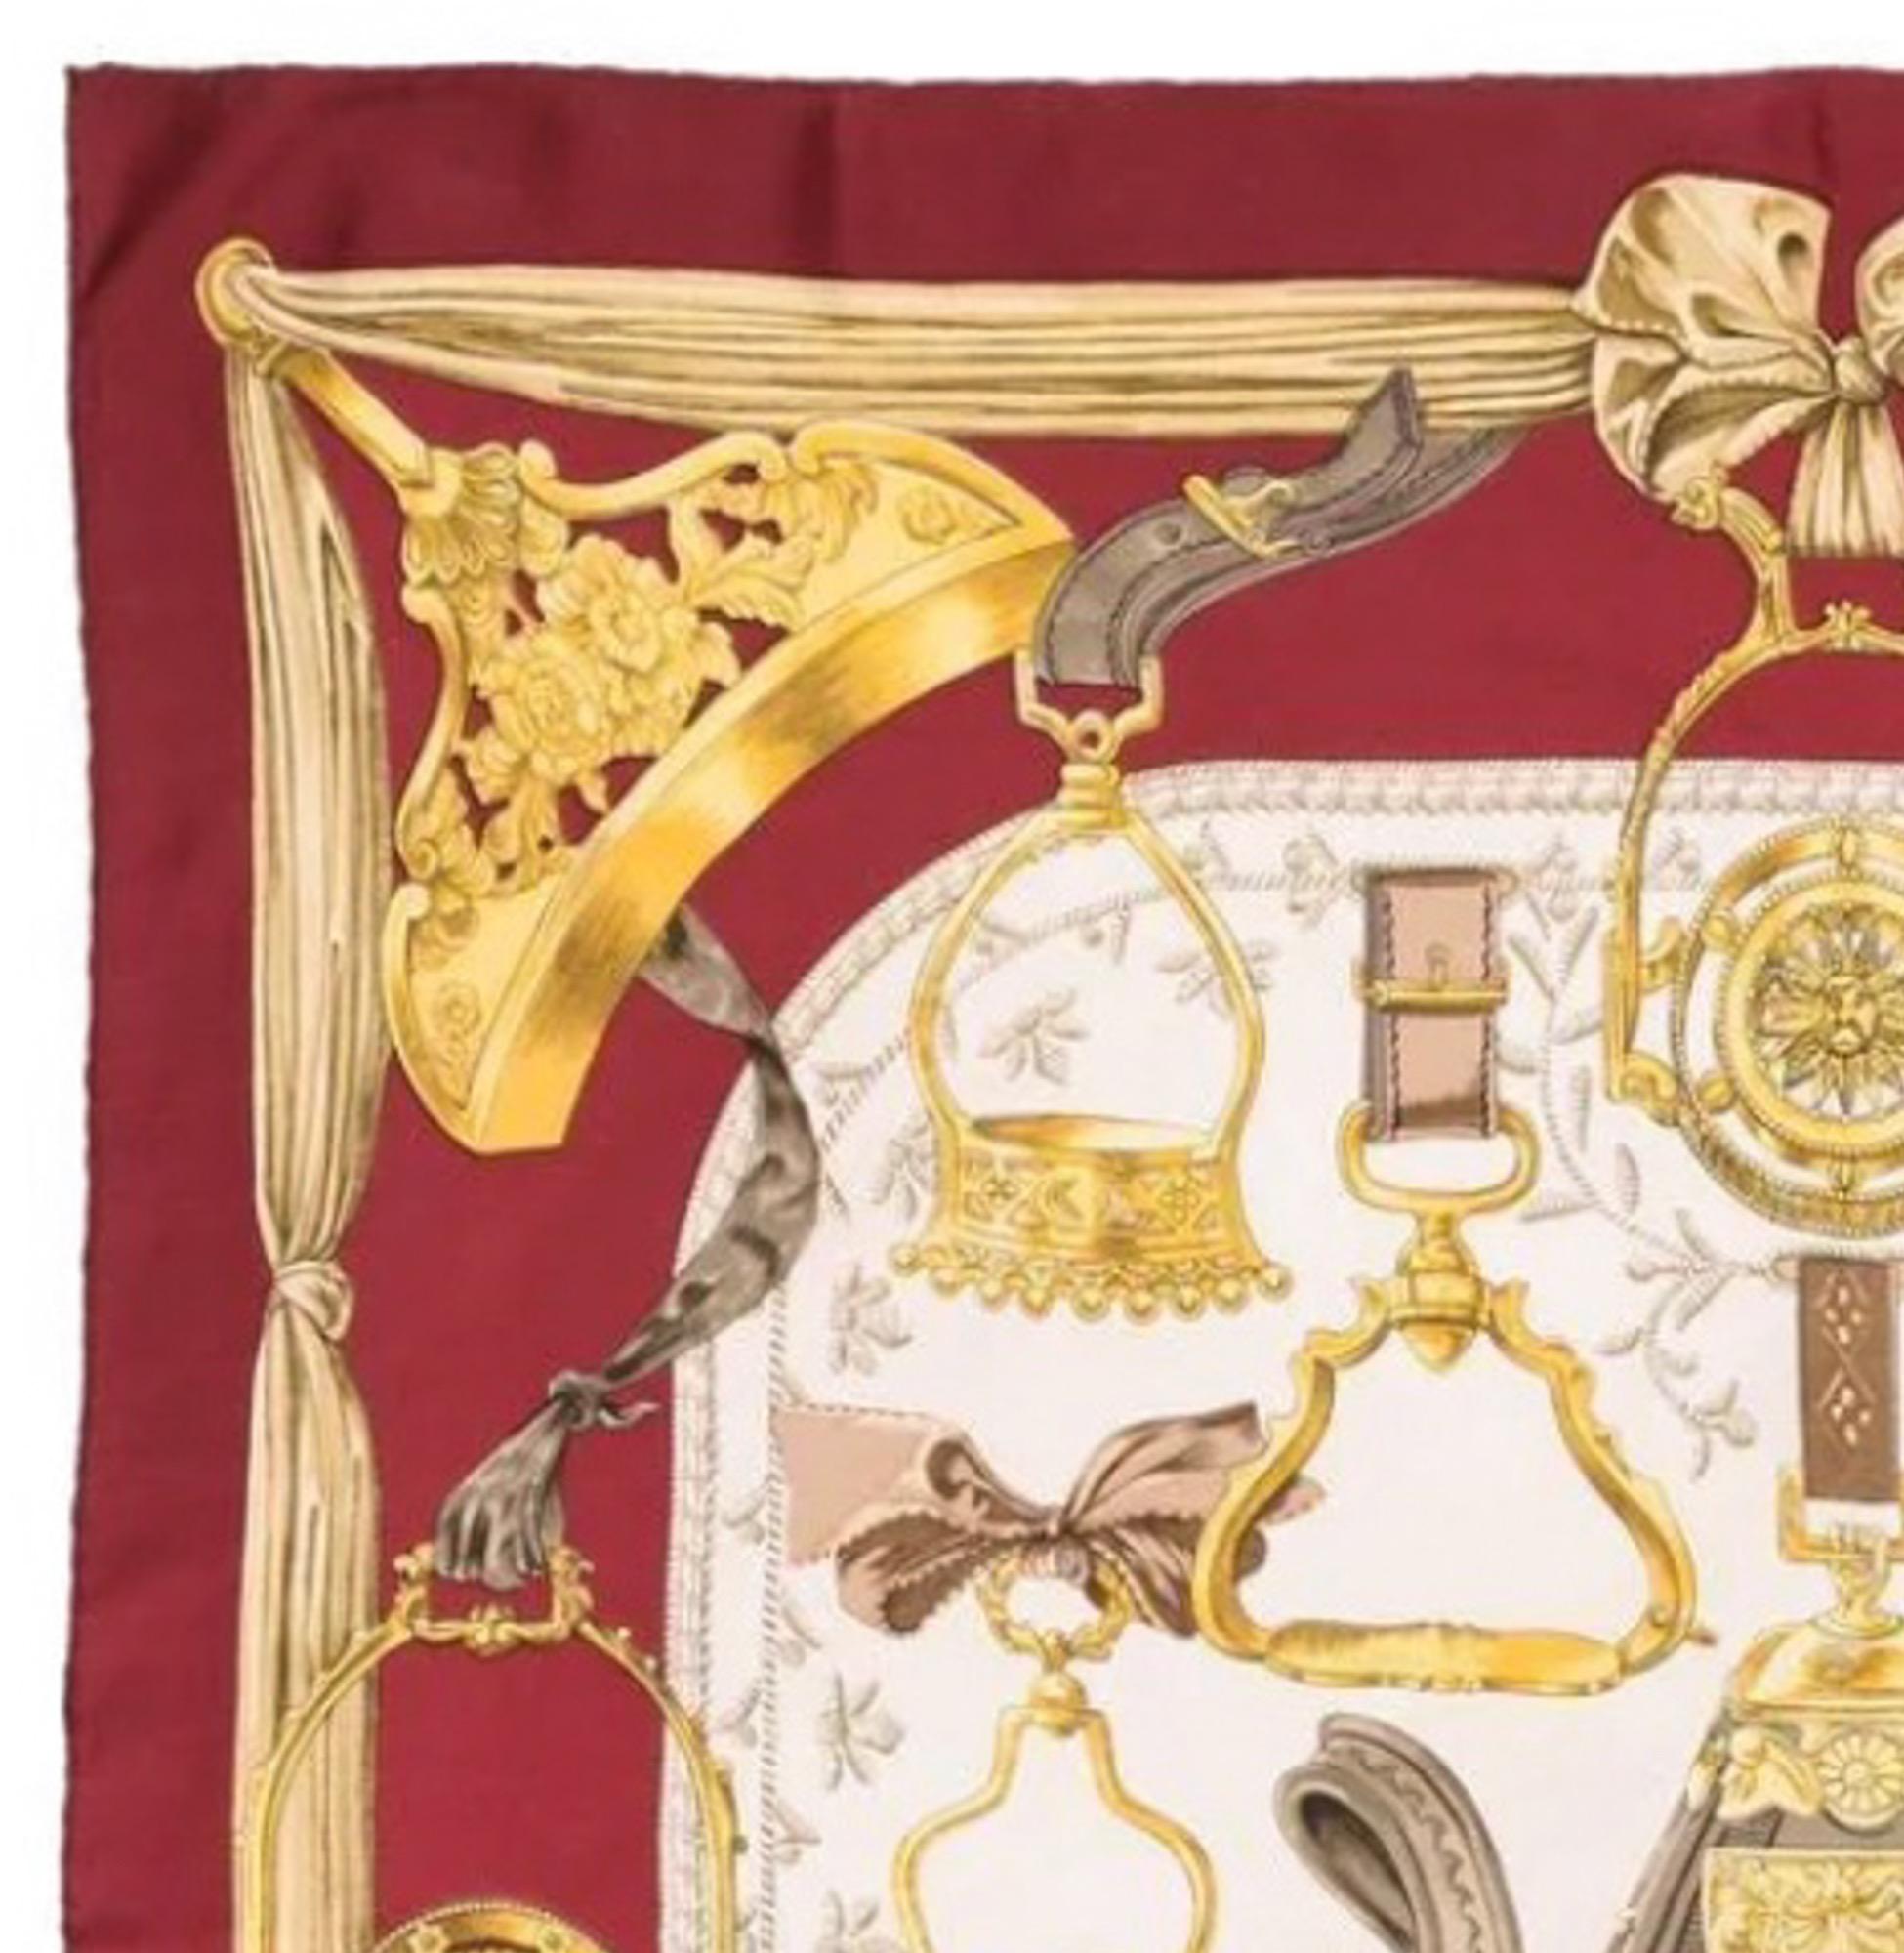 Hermes silk scarf Etriers by F.de la Perriere featuring a red border.
Circa 1964 
In good vintage condition. Made in France.
35,4in. (90cm)  X 35,4in. (90cm)
We guarantee you will receive this  iconic item as described and showed on photos.
(please